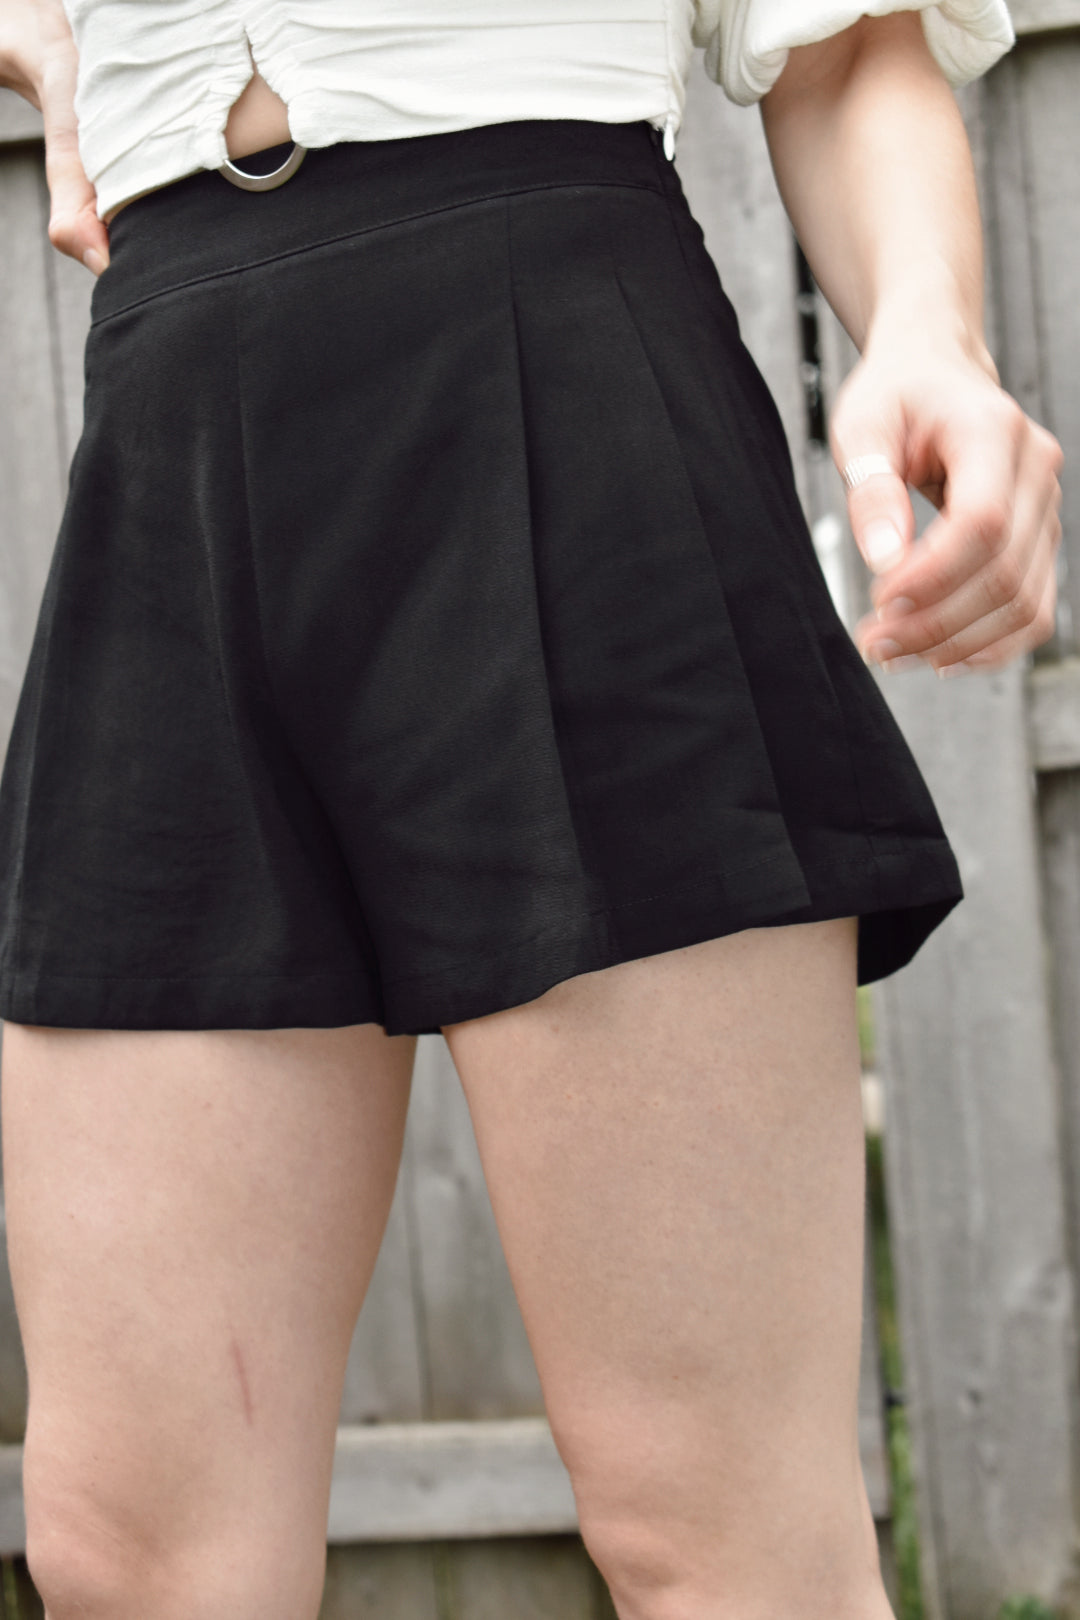 High waisted black pleated dress shorts with zipper enclosure on side fitted band on top. The brand is Mittoshop.